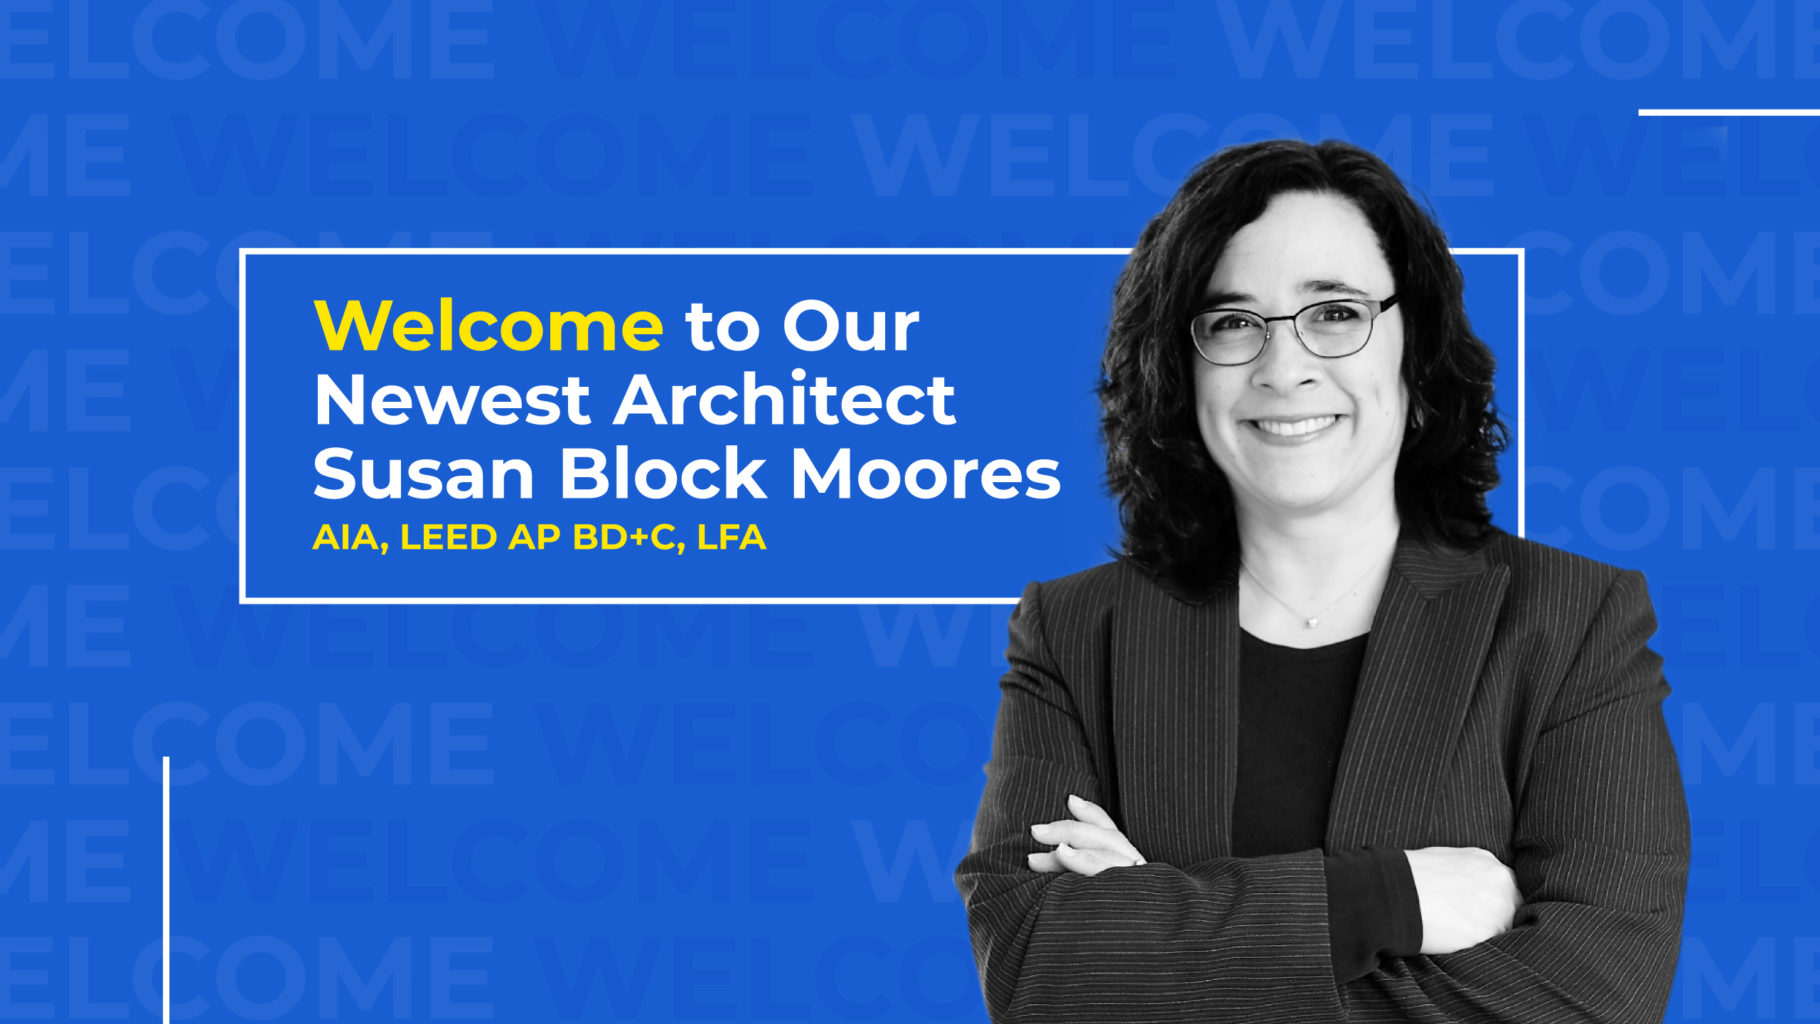 MMD is Pleased to Welcome Architect Susan Block Moores to Our Team